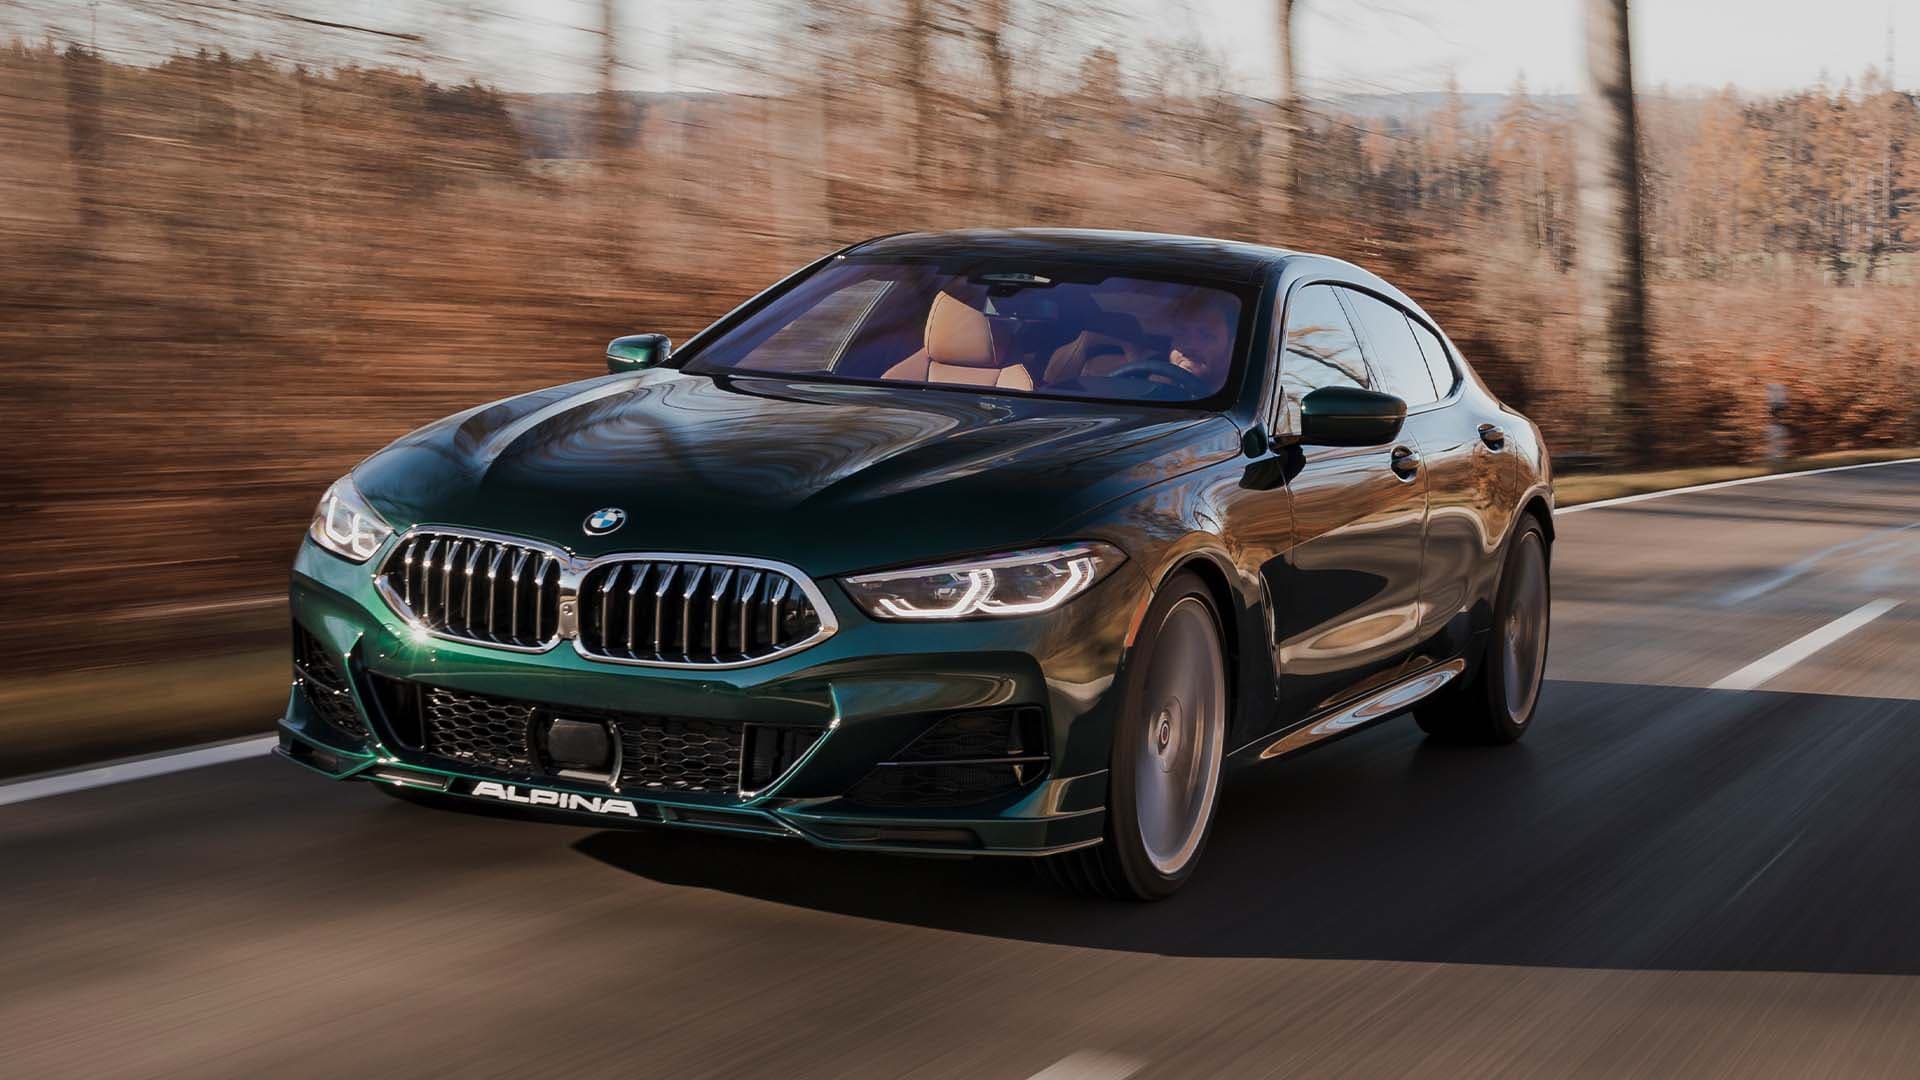 BMW Is Acquiring Alpina After All These Years